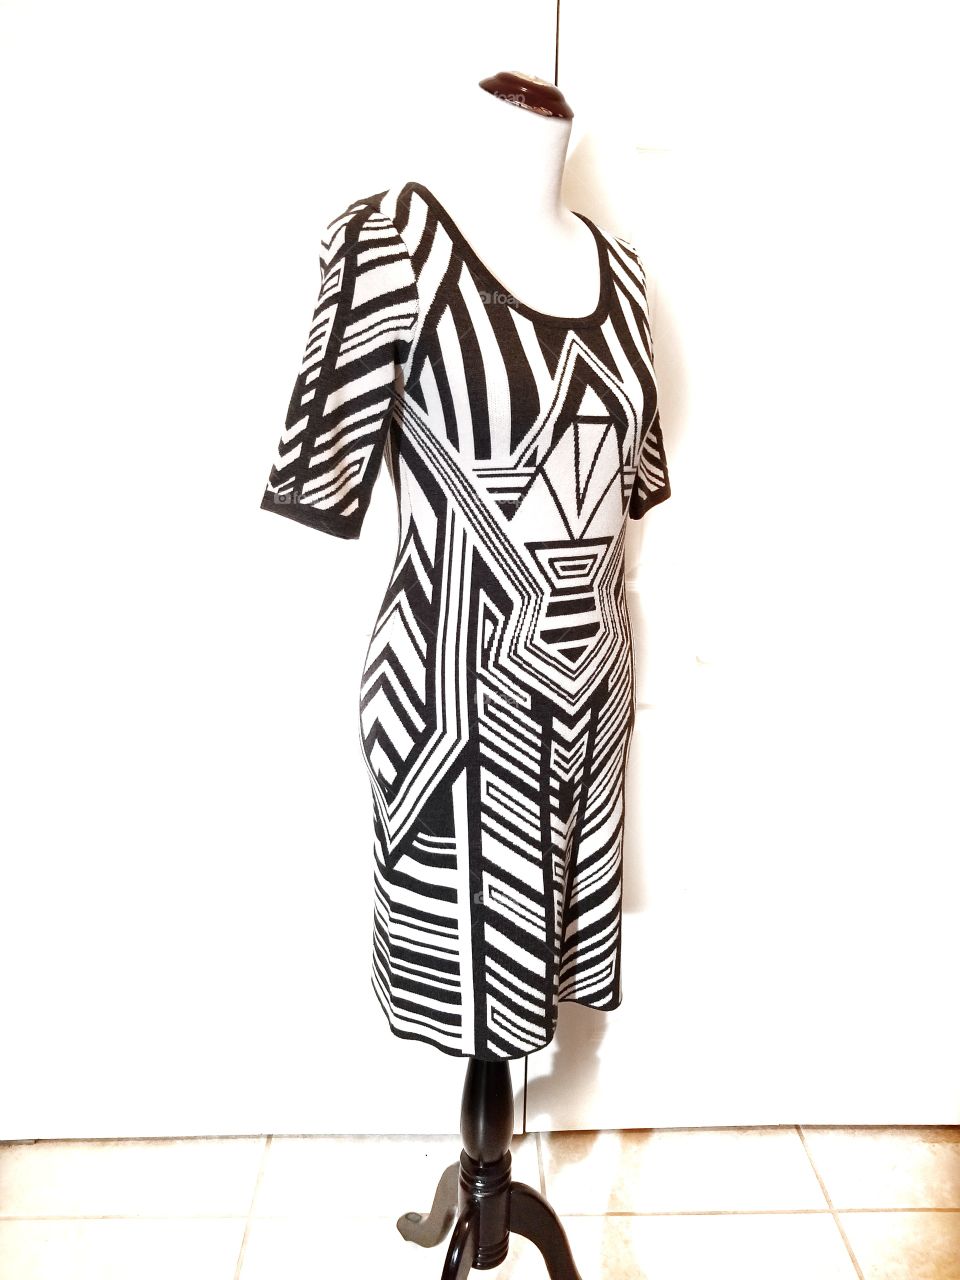 Pattern Sweater Dress in a Geometric Black and White Print.